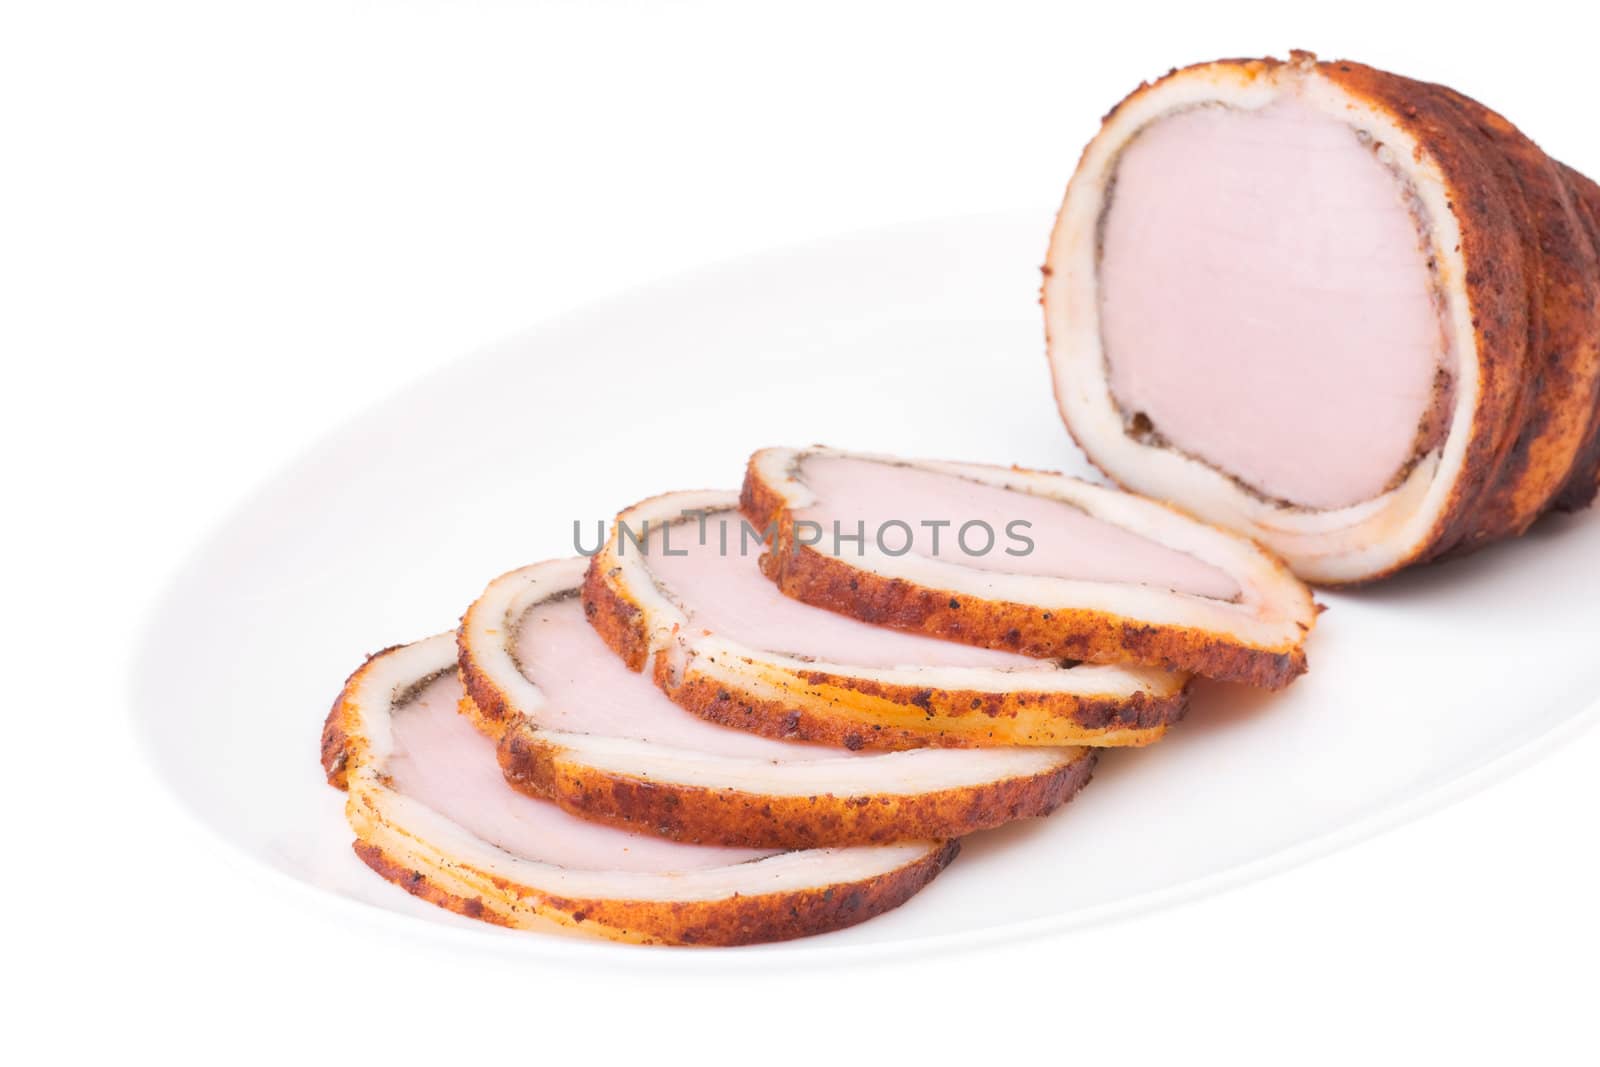 Delicious baked ham with bacon isolated over white. Bon appetit!